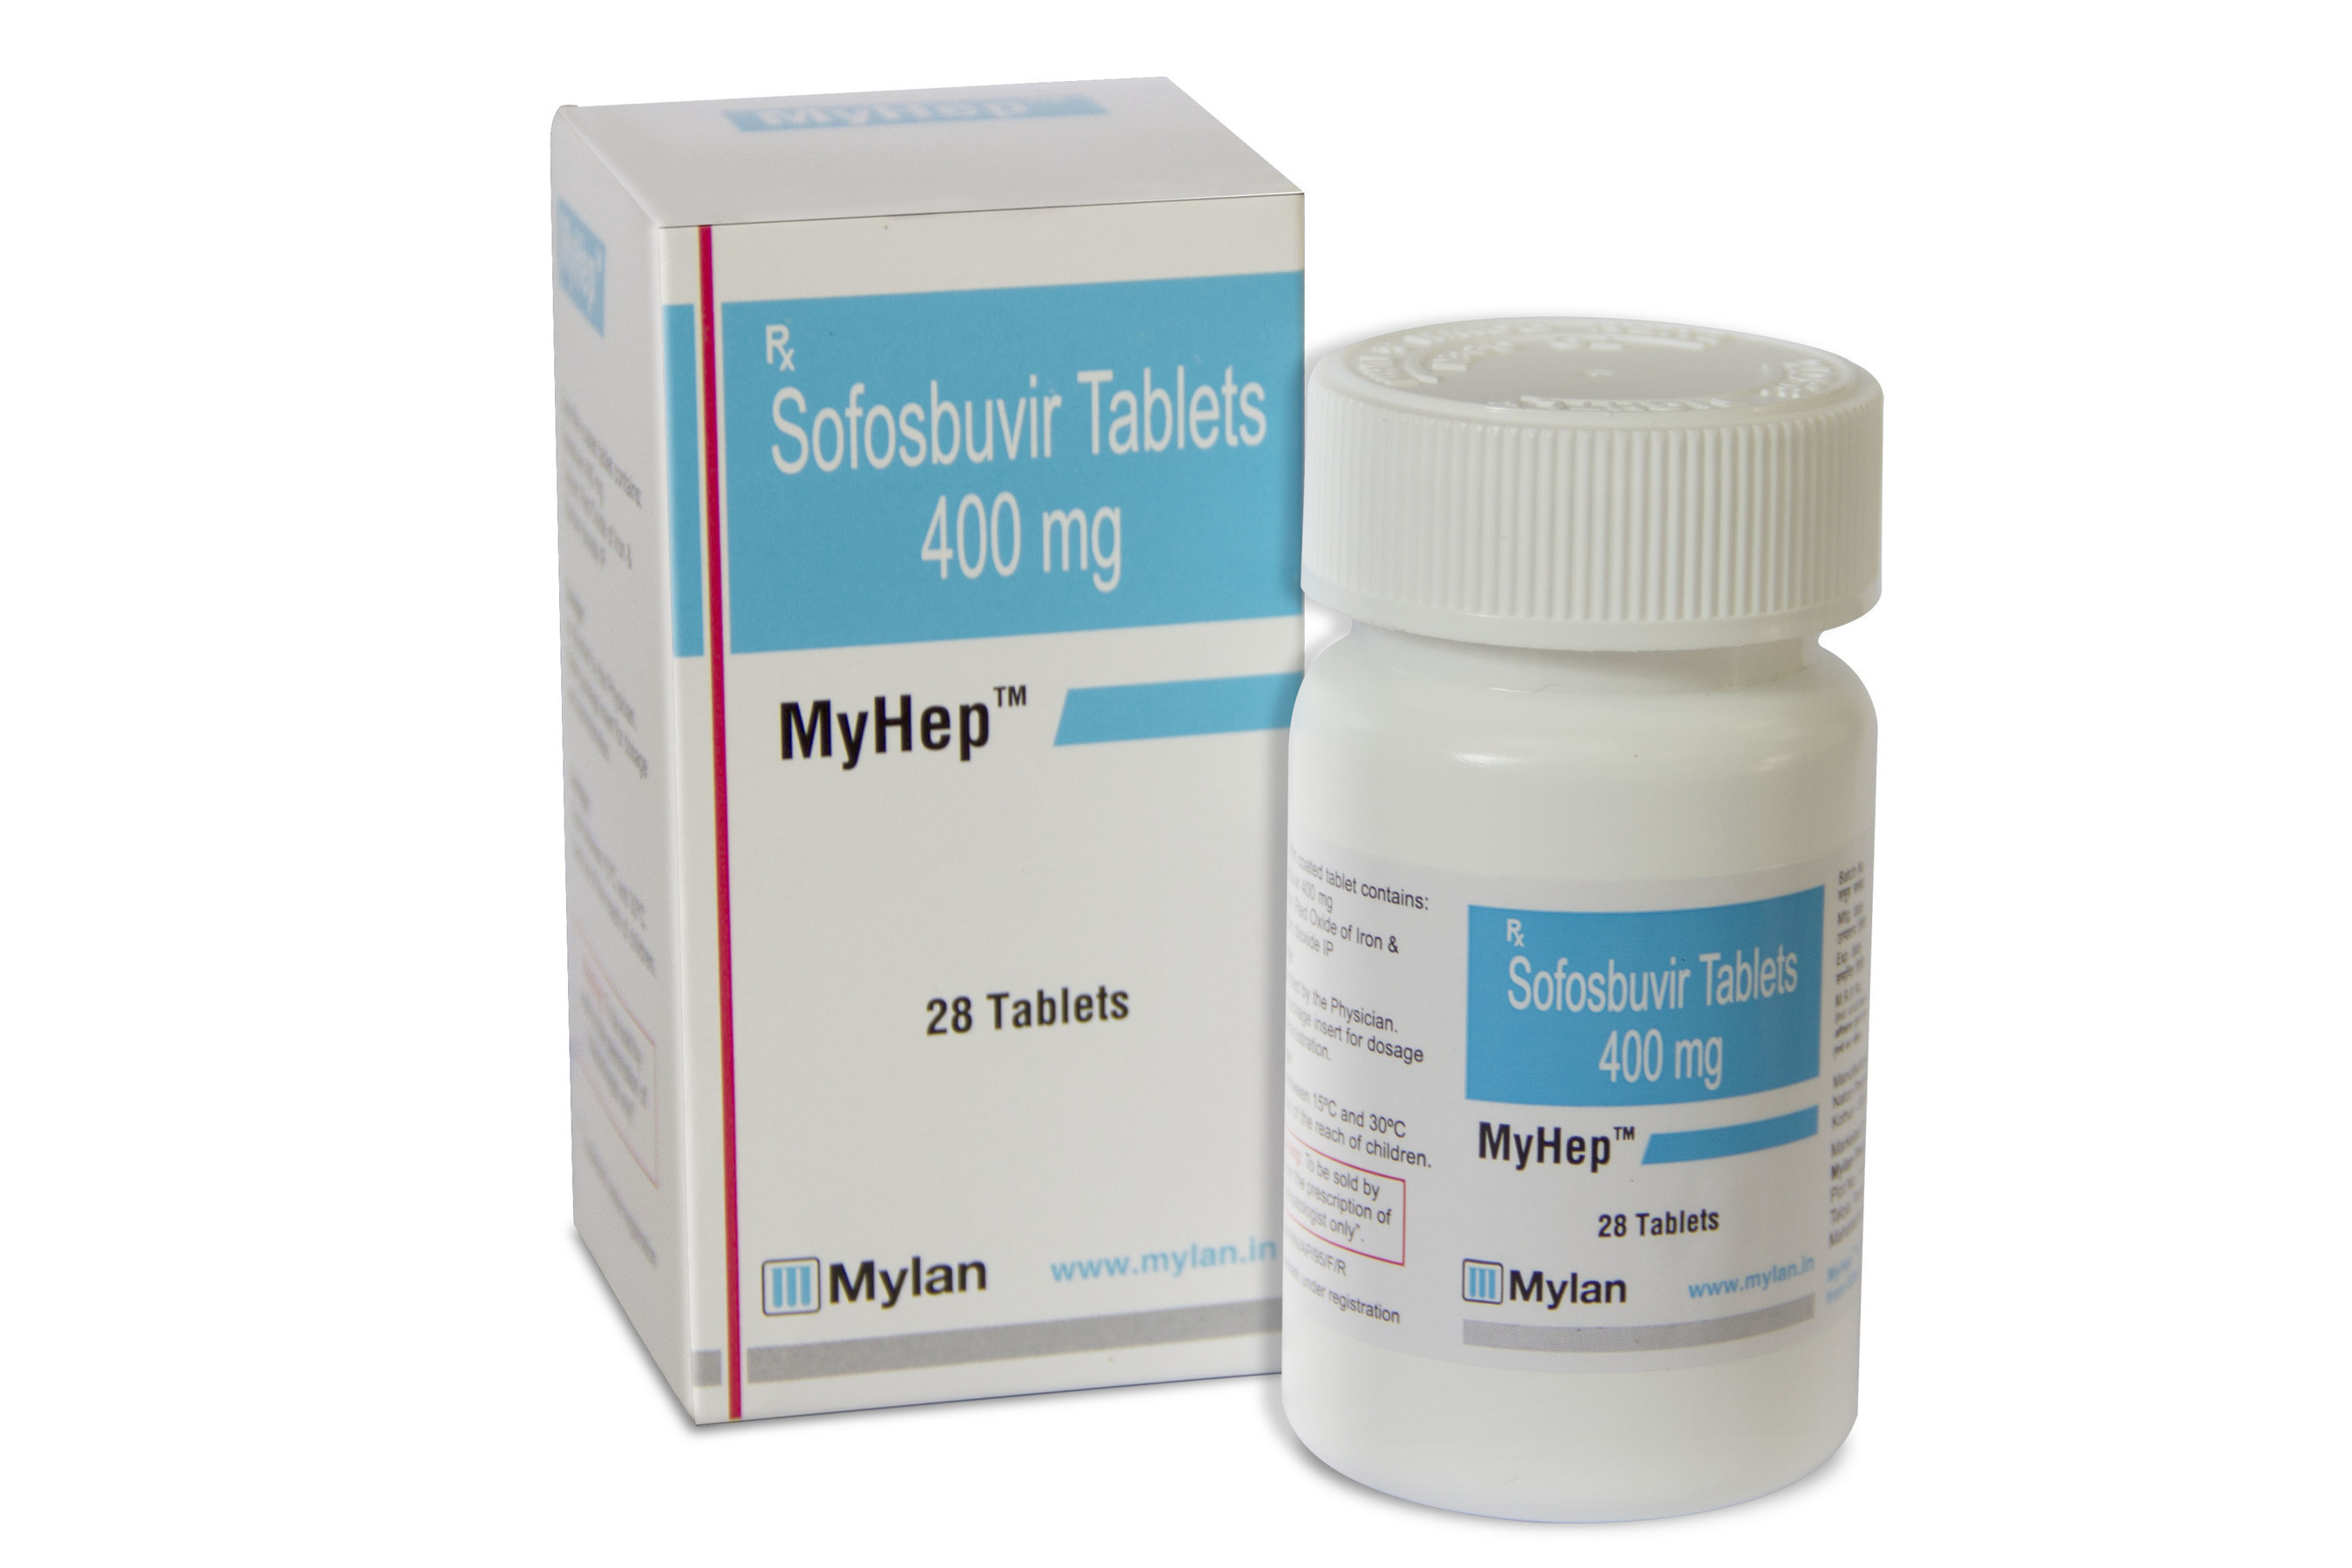 Mylan launches generic Sofosbuvir 400 mg tablets under the brand name MyHep in India.